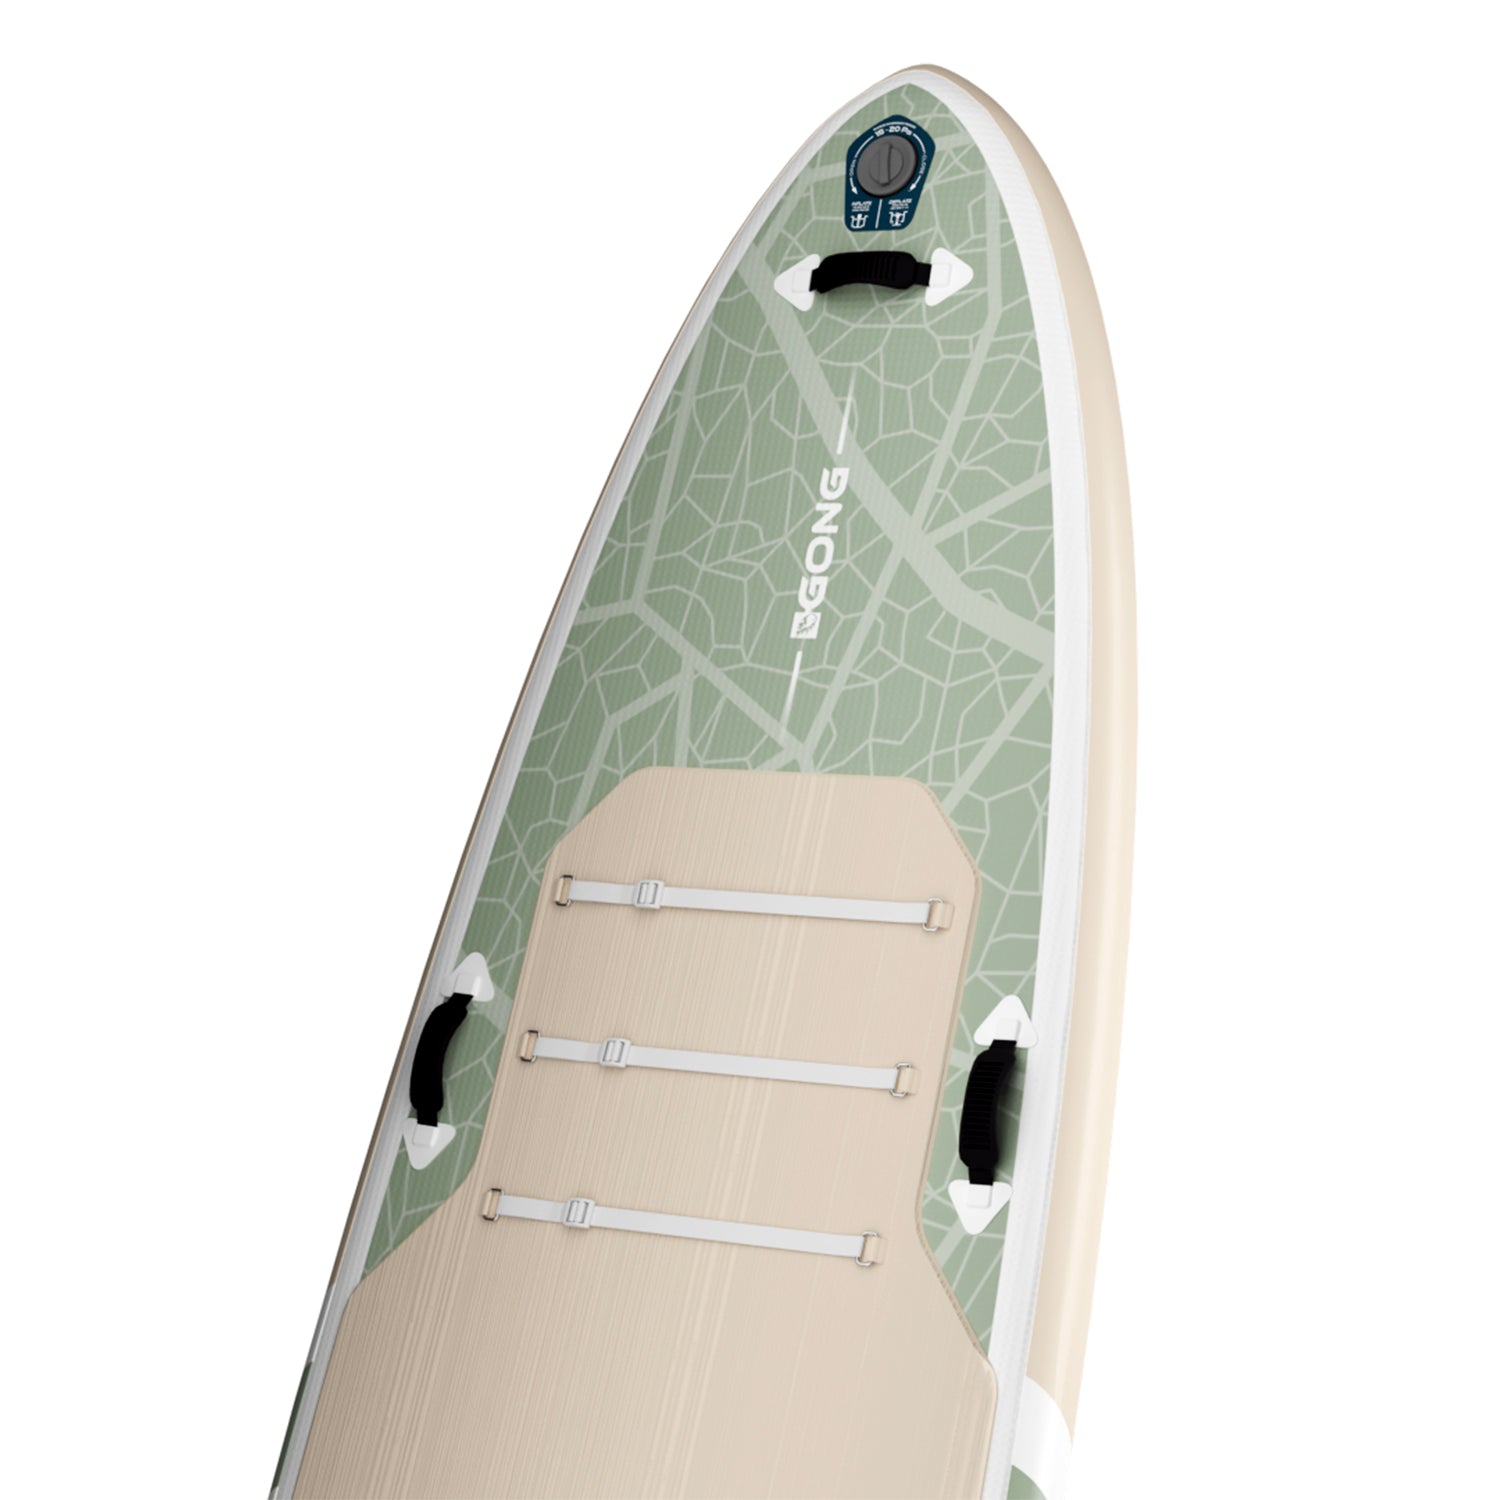 GONG | SUP Inflatable Couine Marie Allround Limited Edition River